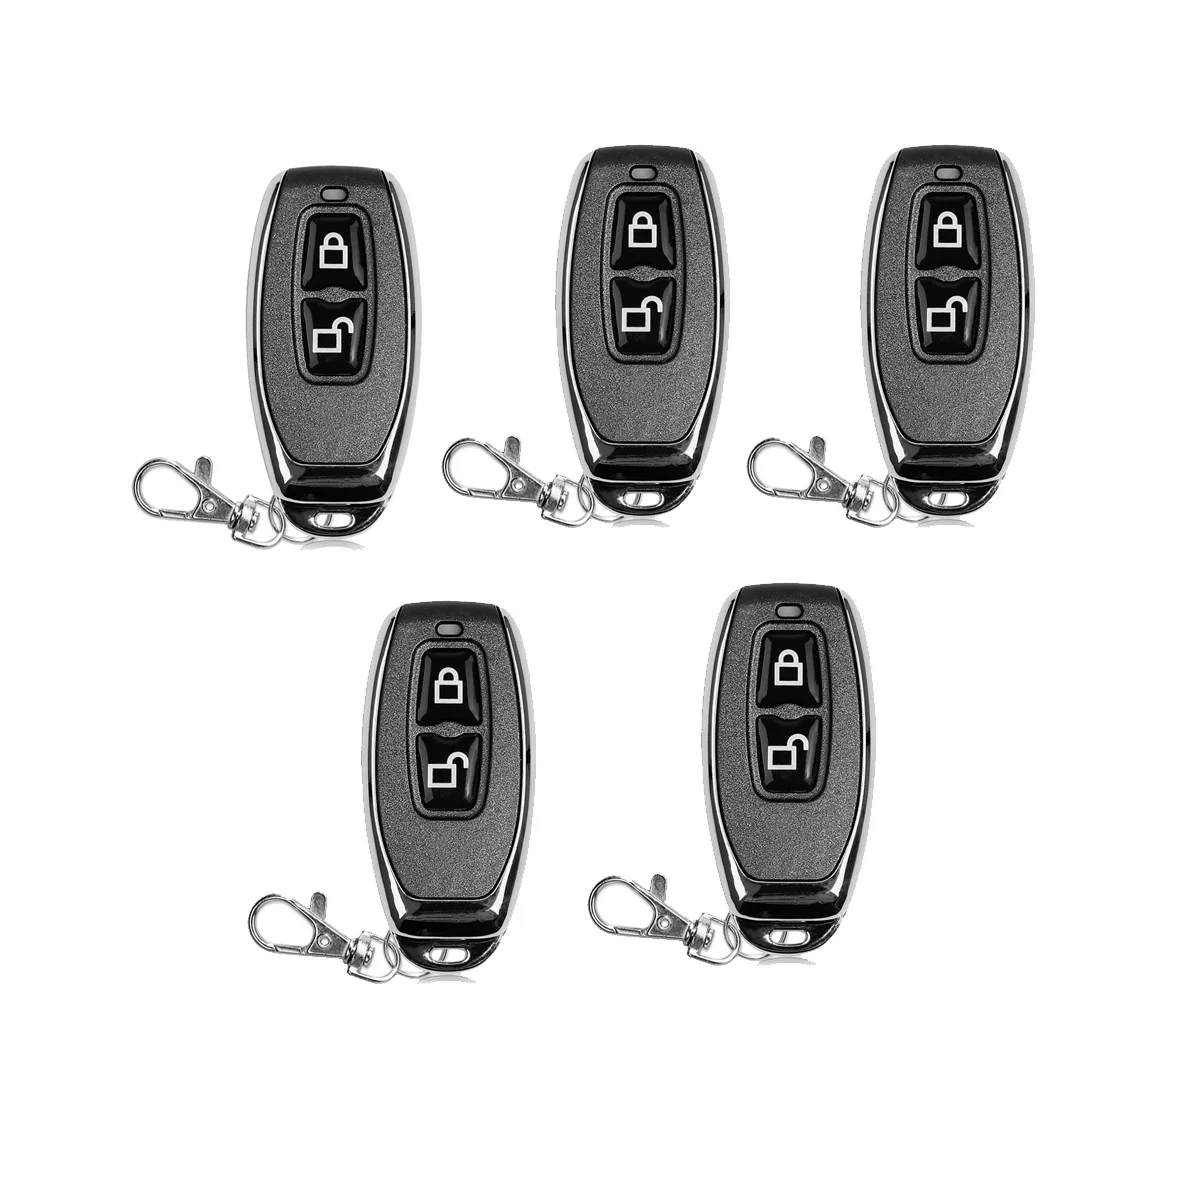 

For Xhorse XKGD12EN Universal Wire Garage Door Remote Key Fob 2 Buttons for VVDI Key Tool